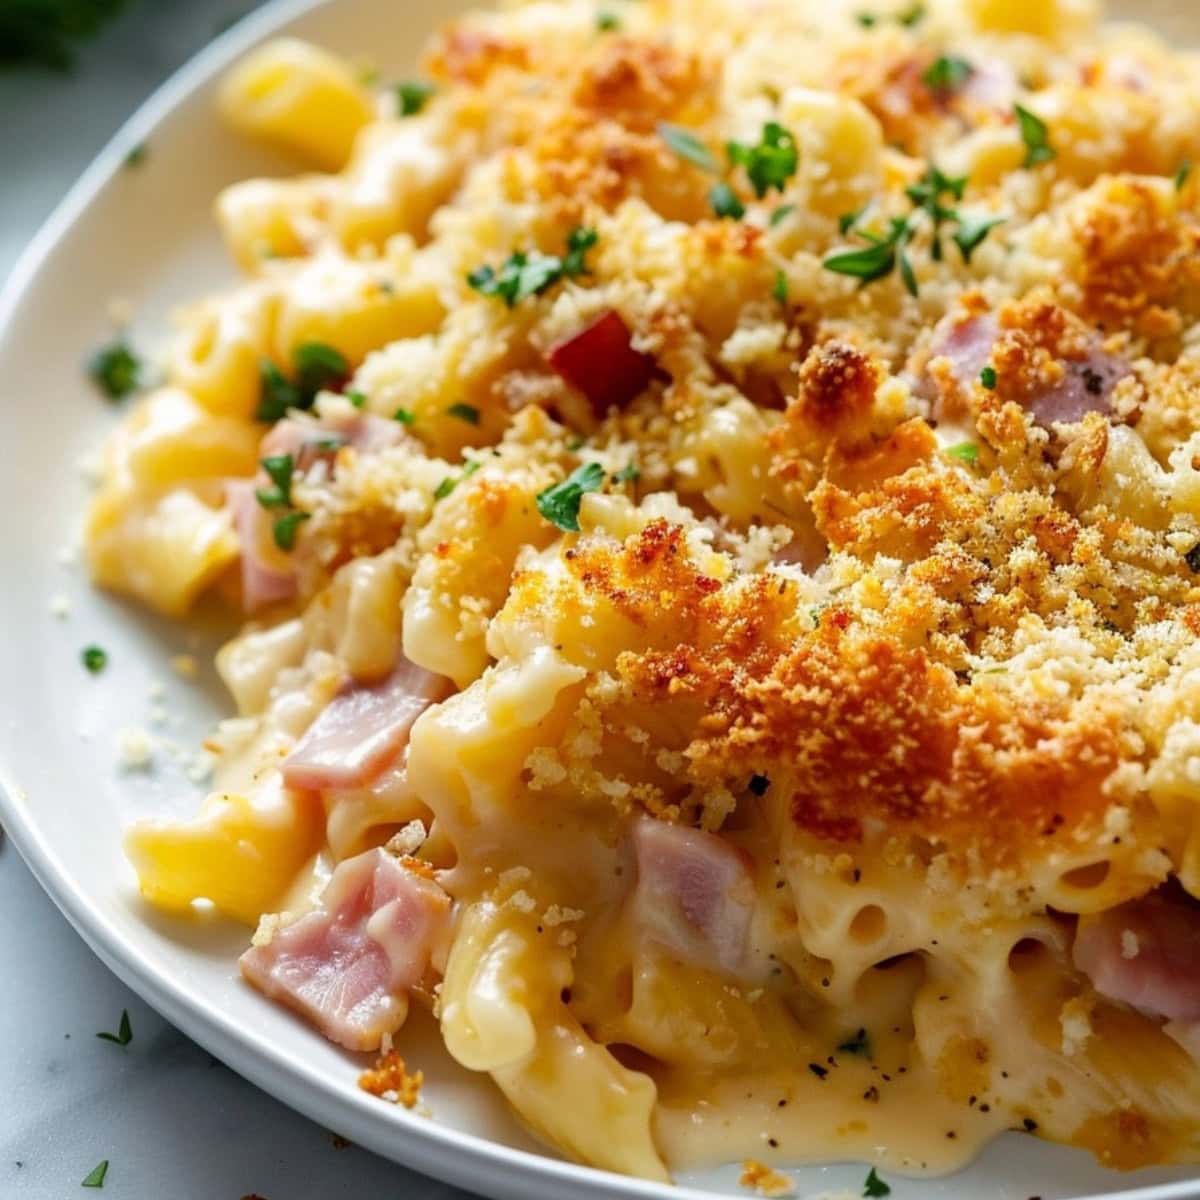 Ham and cheese casserole topped with bread crumbs served in plate.